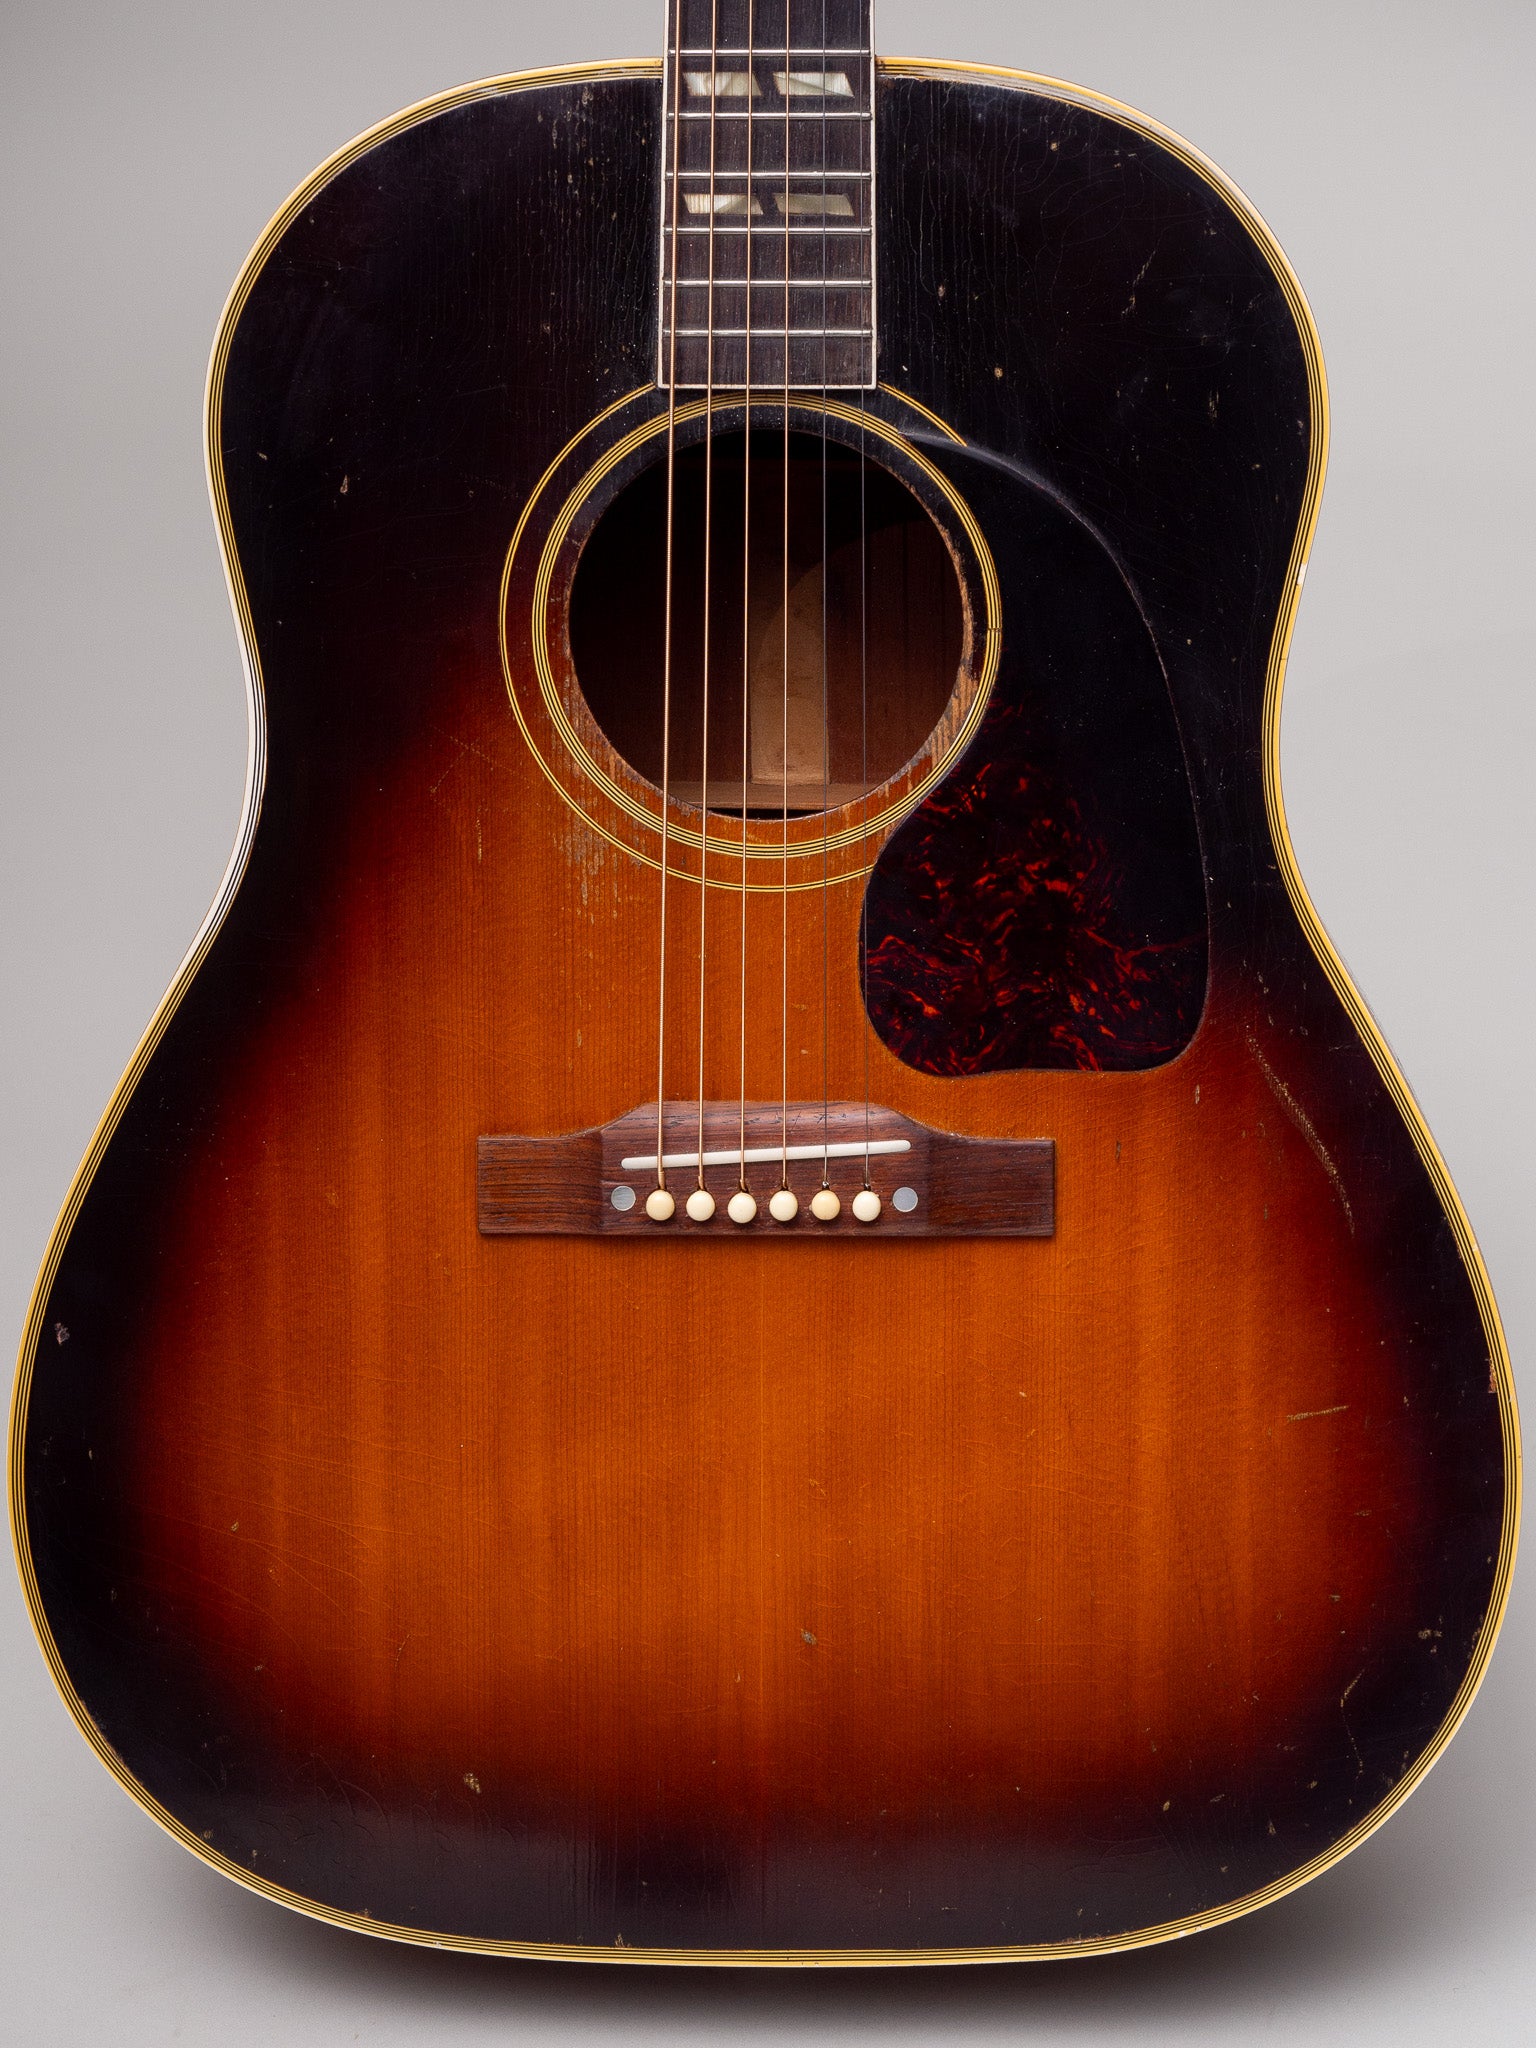 1954 Gibson Southern Jumbo Full Guitar Body Front